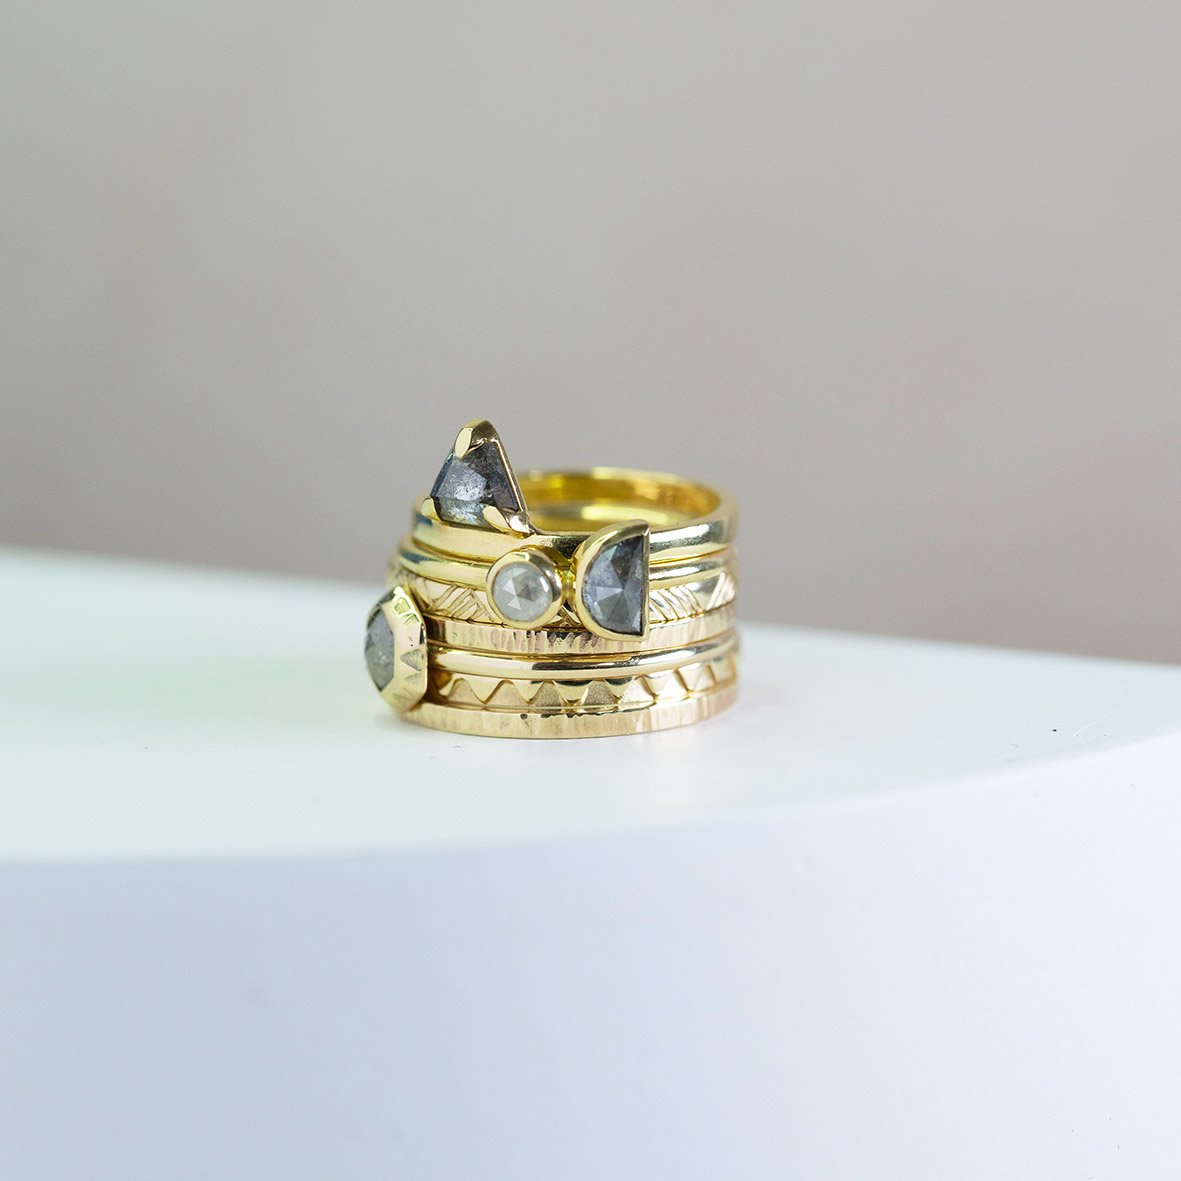  A stack of wedding bands and engagement rings, all with subtle graphic textures and patterns and some with modern, ethically sourced blue stones set in. 